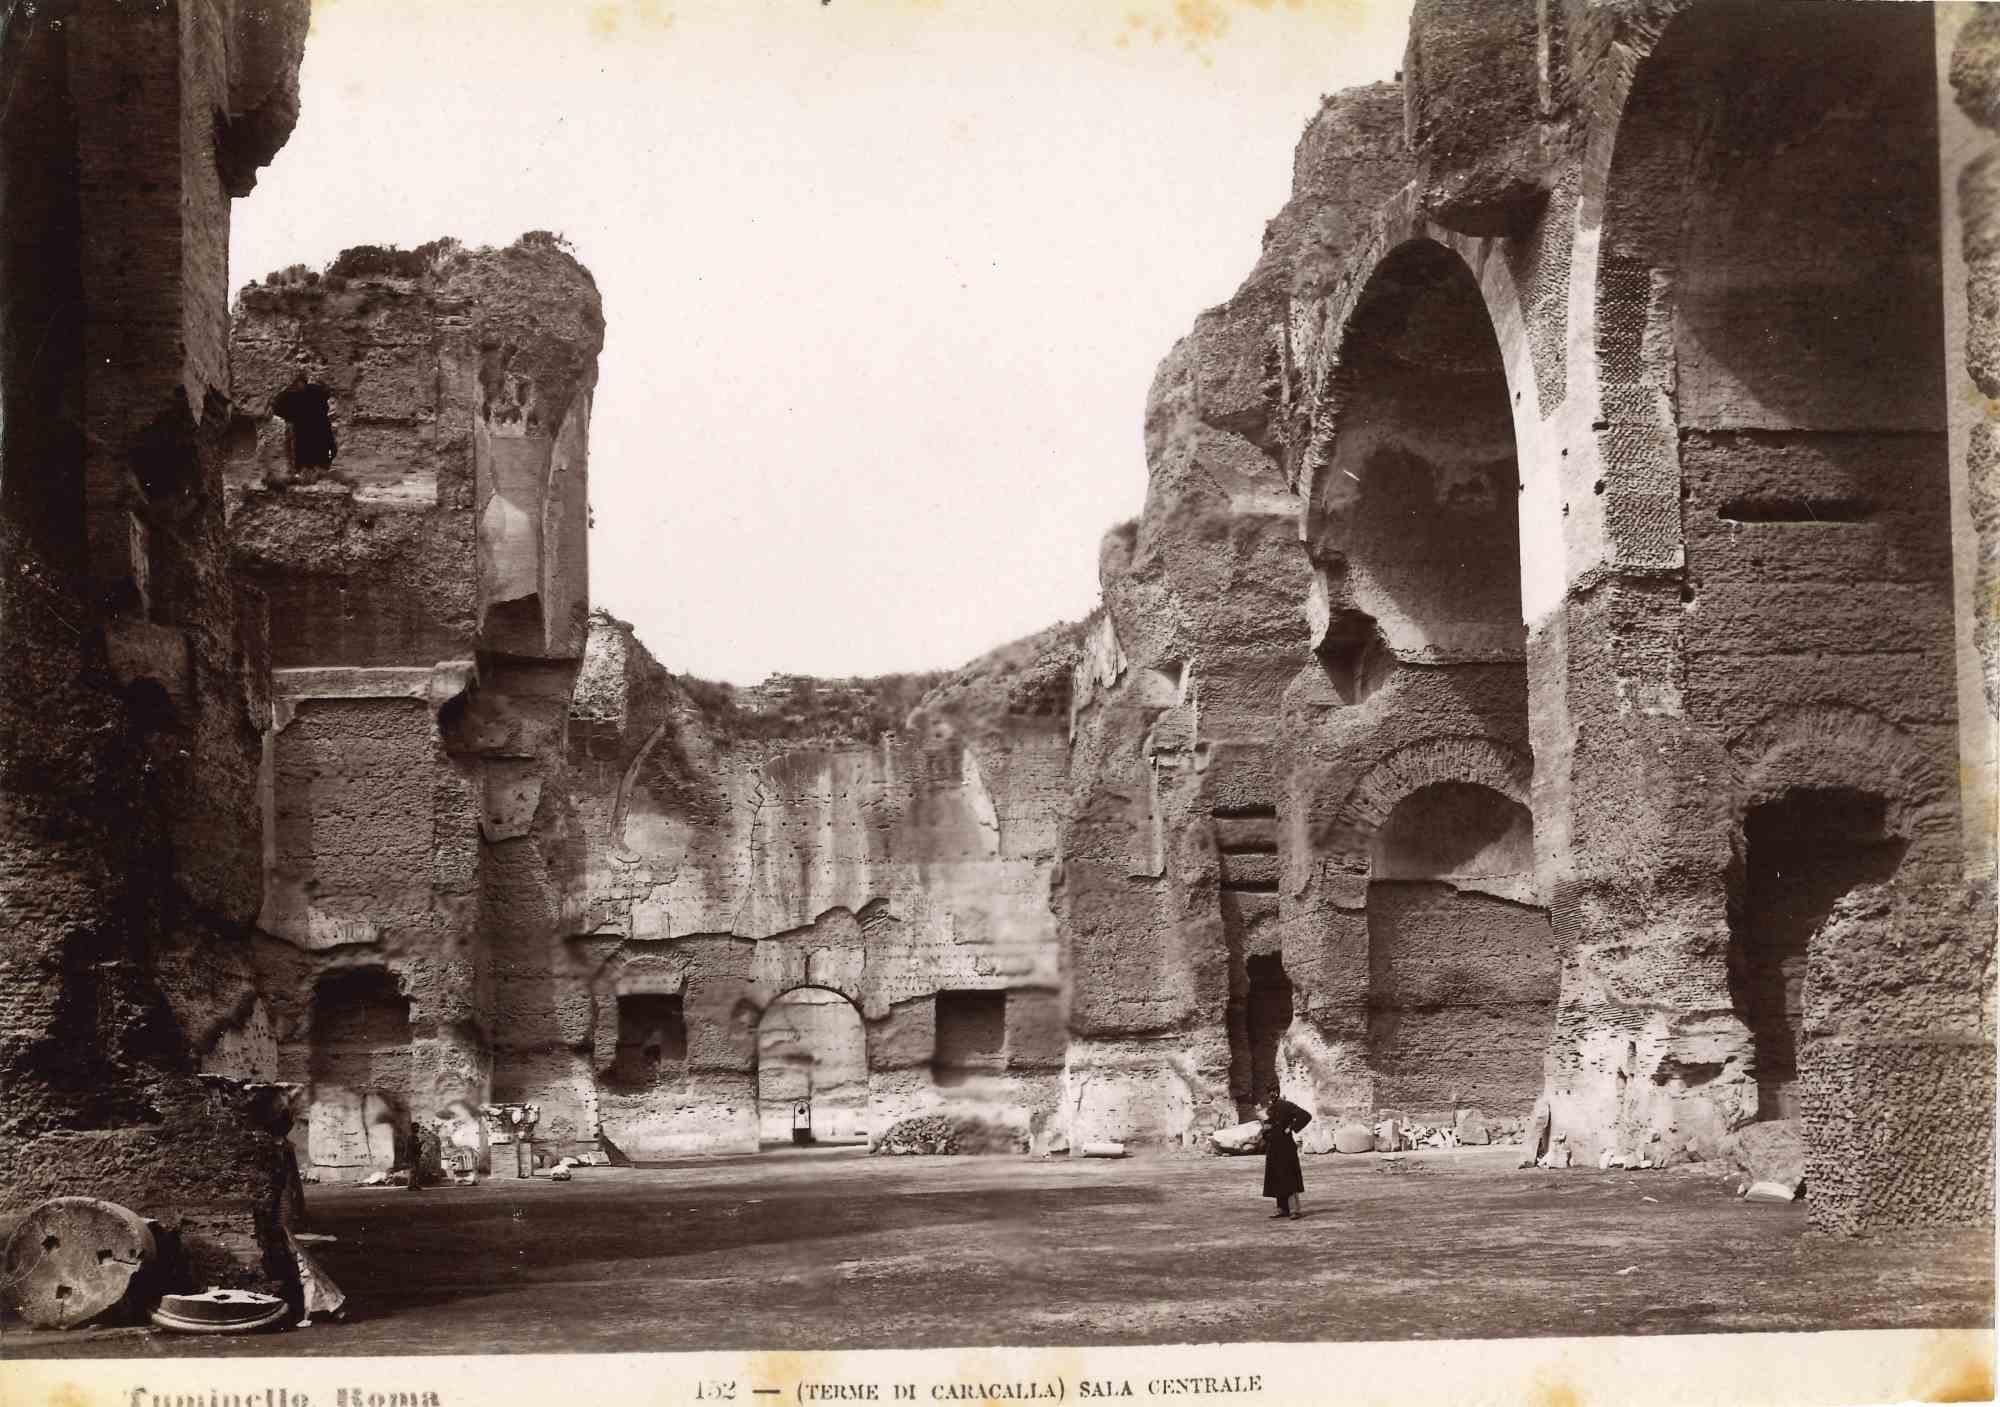 Baths of Caracalla is a vintage sepia photograph realized by Ludovico Tuminello in the early 20th Century.

Titled on the lower.

Good conditions except for some foxing.